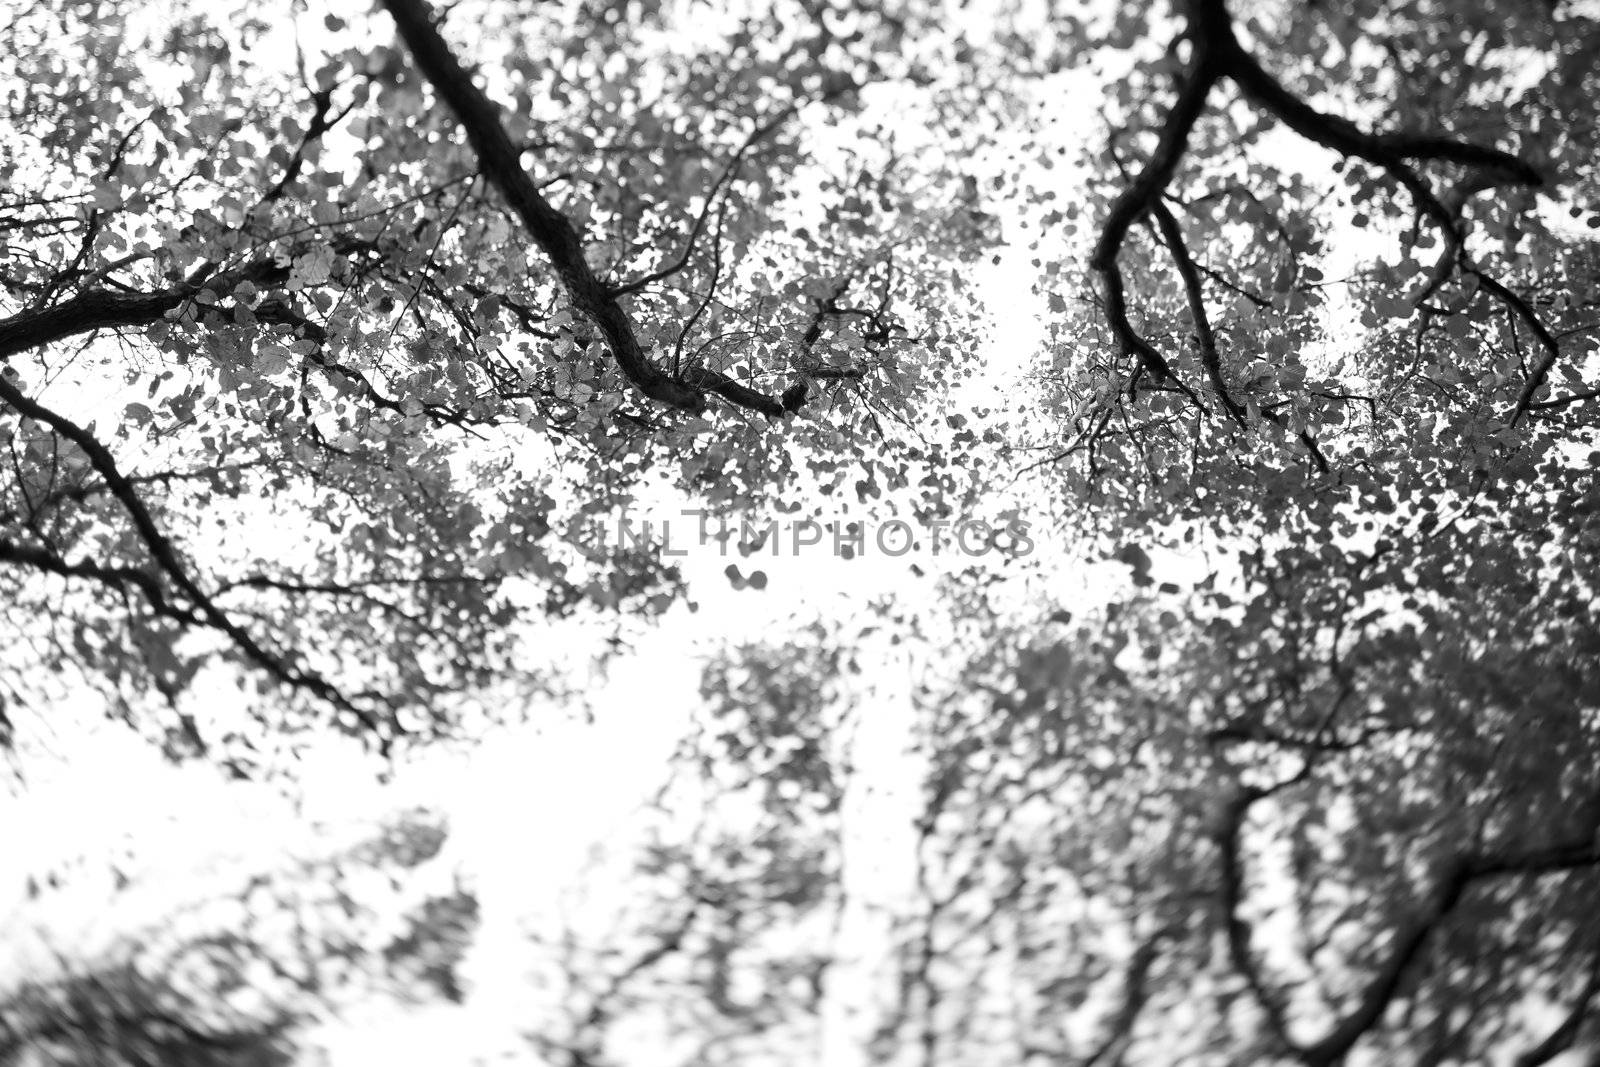 Black and white picture of trees against white sky